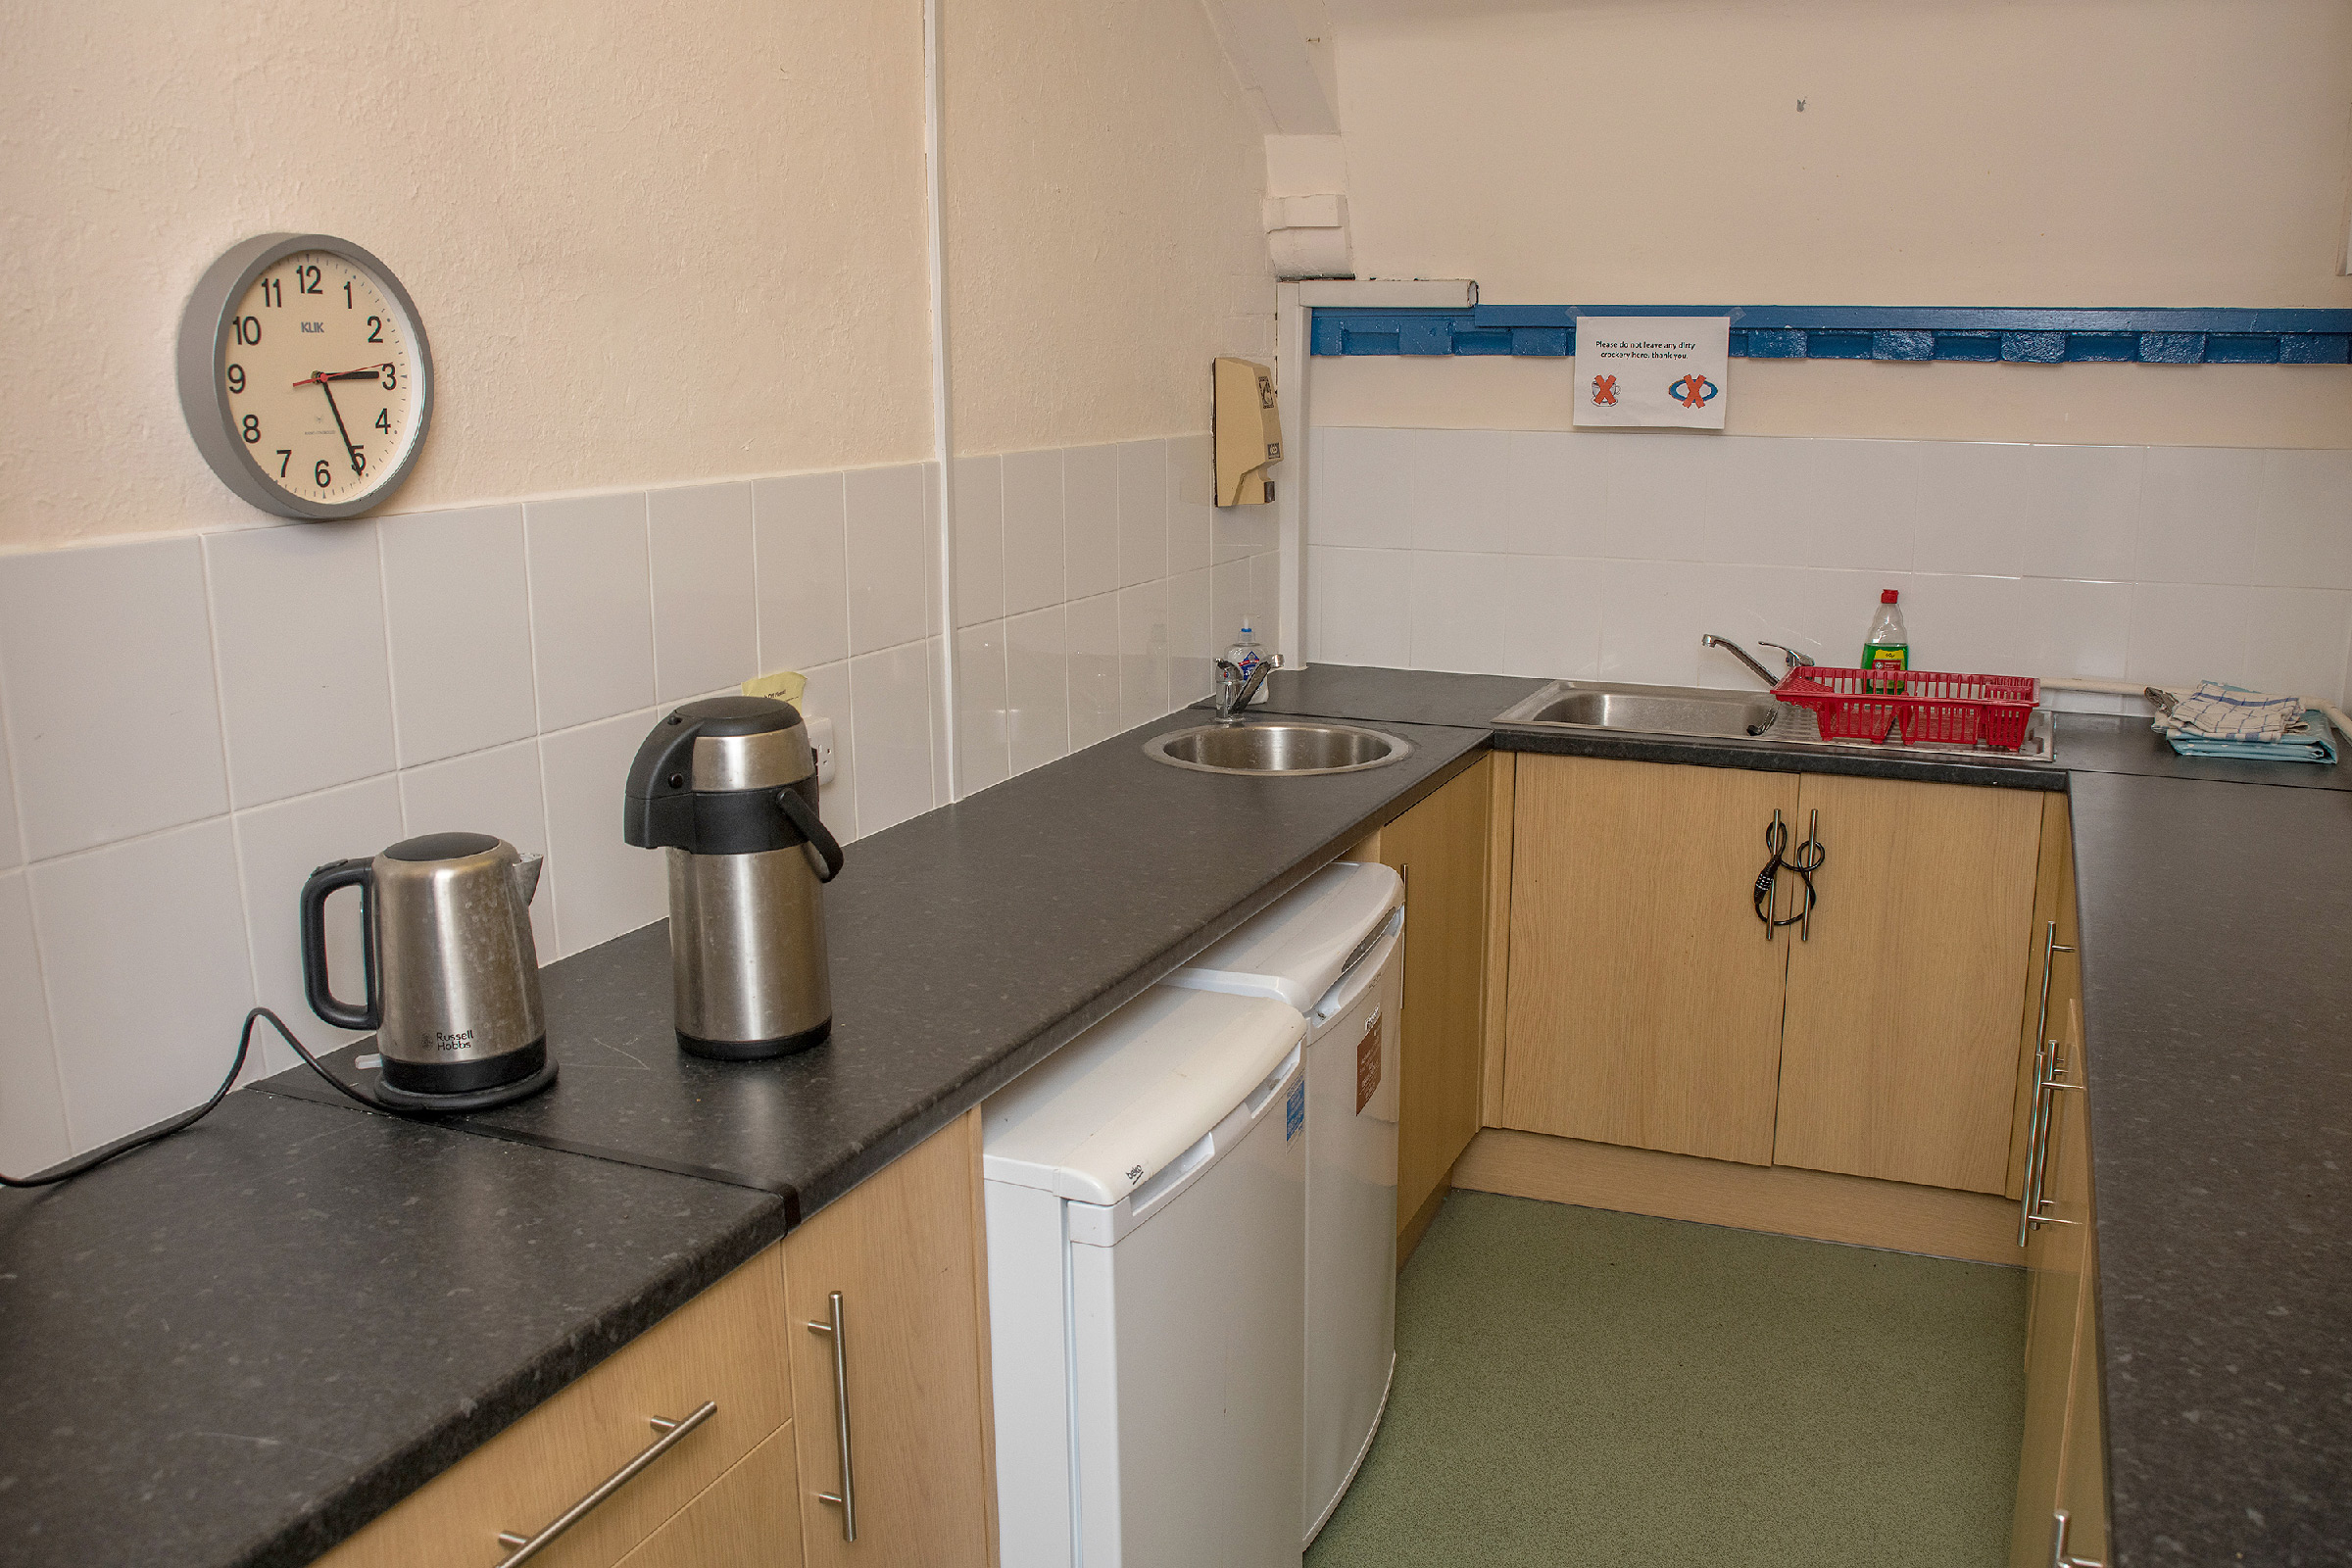 The kitchen adjacent to the upper hall with its dual sinks set into a dark worktop atop 6 cupboards. A kettle and thermos flask sit on the worktop to one side.